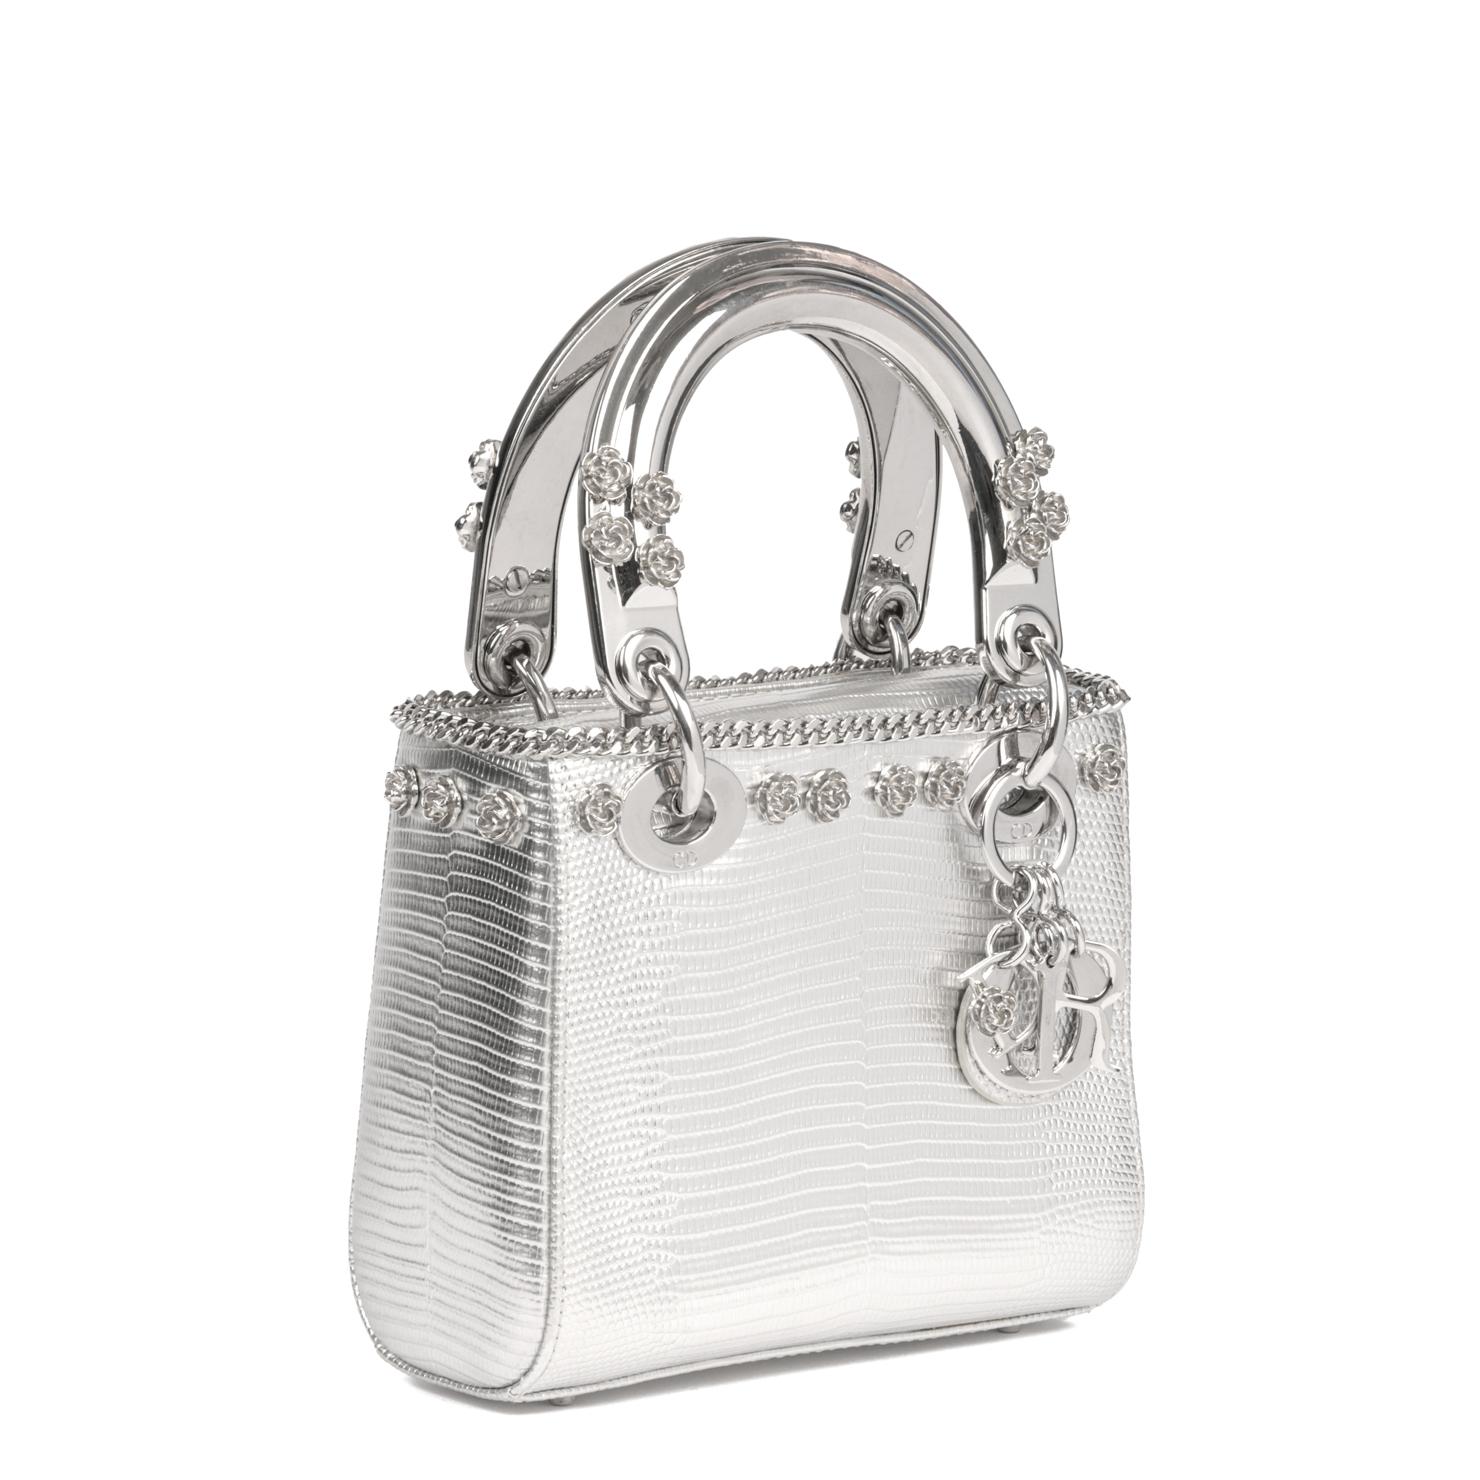 CHRISTIAN DIOR
Silver Lizard Leather, Flower Studded Mini Lady Dior 

Xupes Reference: CB891
Serial Number: 16-BO-1100
Age (Circa): 2010
Accompanied By: Christian Dior Dust Bag, Shoulder Strap
Authenticity Details: Date Stamp (Made in Italy)
Gender: